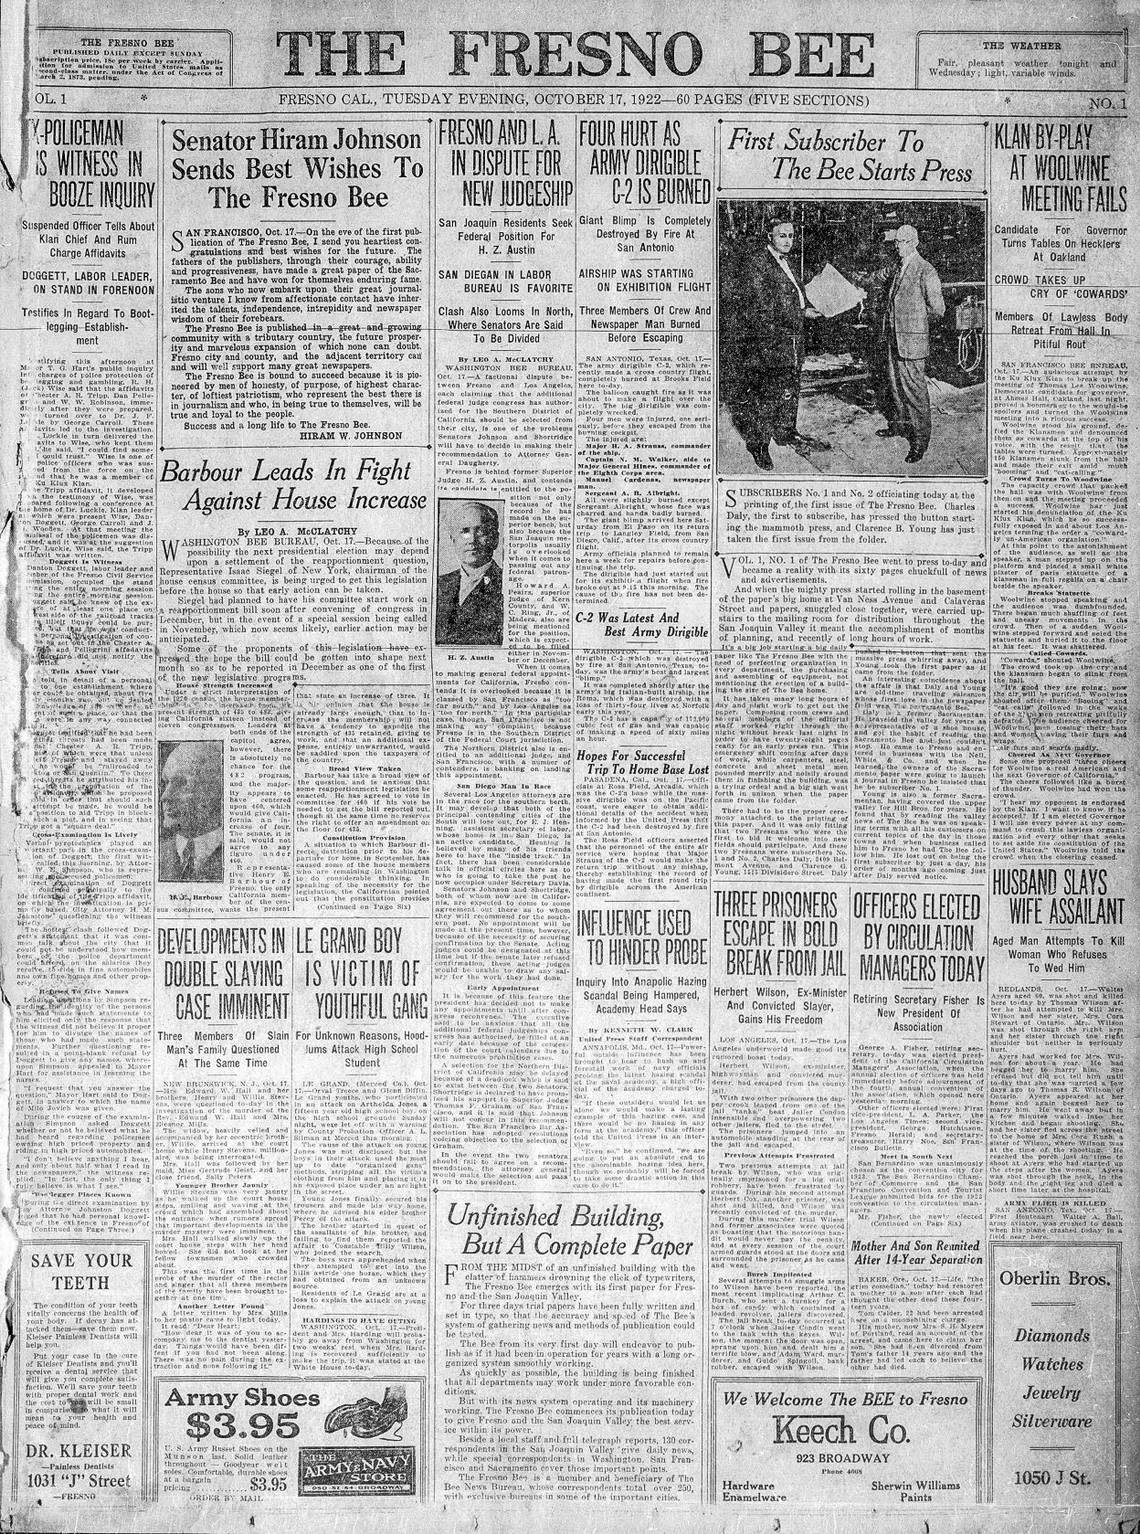 The front page of the first edition of The Fresno Bee was published Oct. 17, 1922.